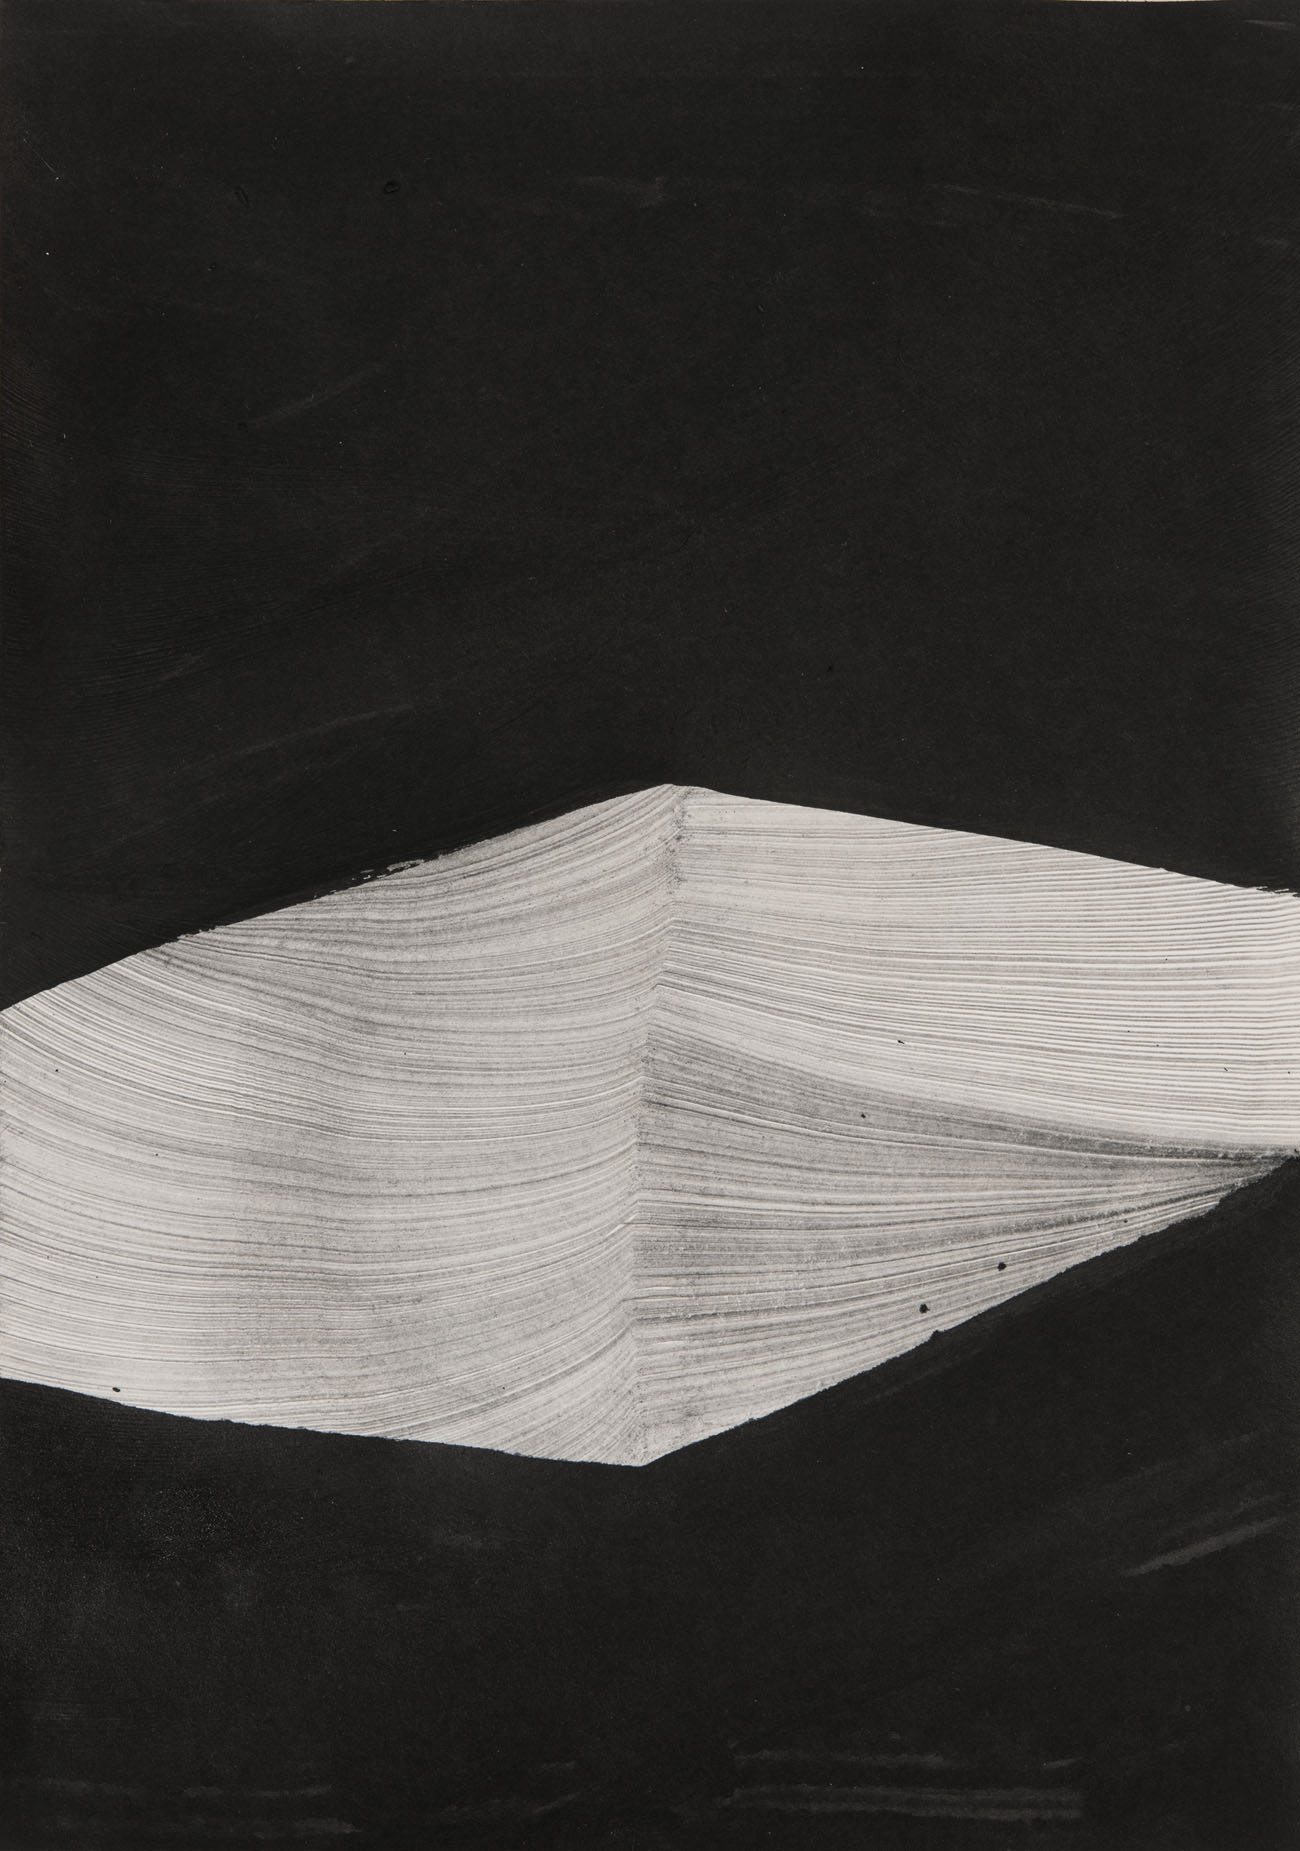 Thomas Müller Untitled (PH 229) Pencil and Indian ink on paper 29.7 x 21 cm 2014